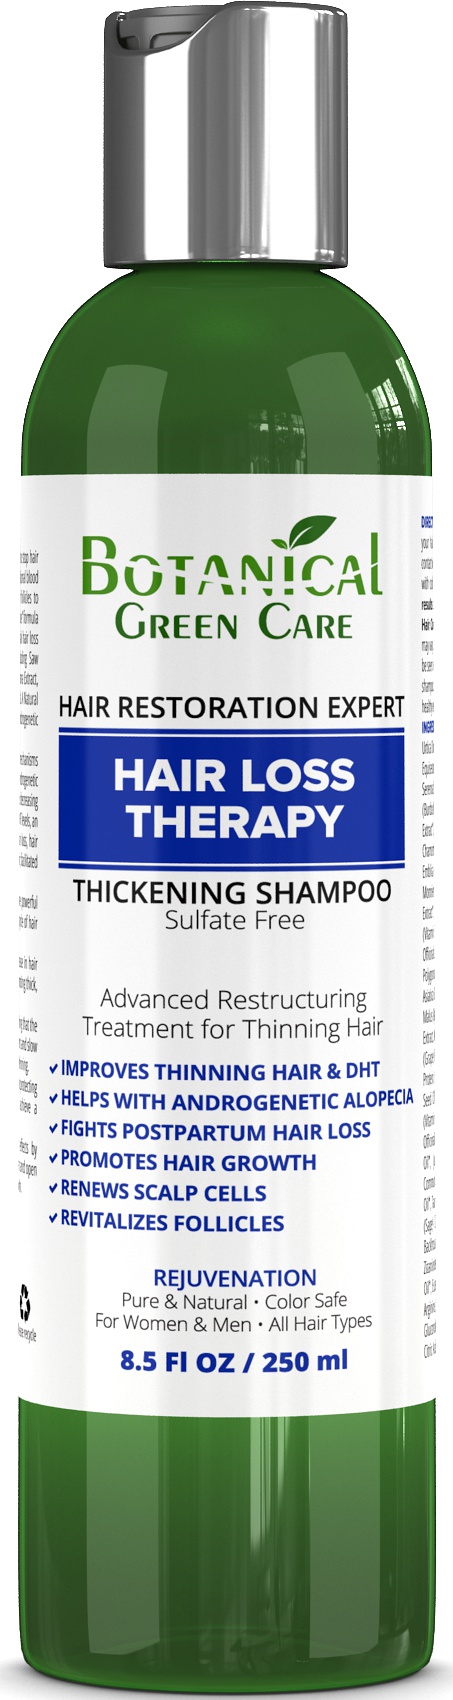 Botanical Green Care “Hair Loss Therapy” Sulfate-free Rejuvenating Shampoo